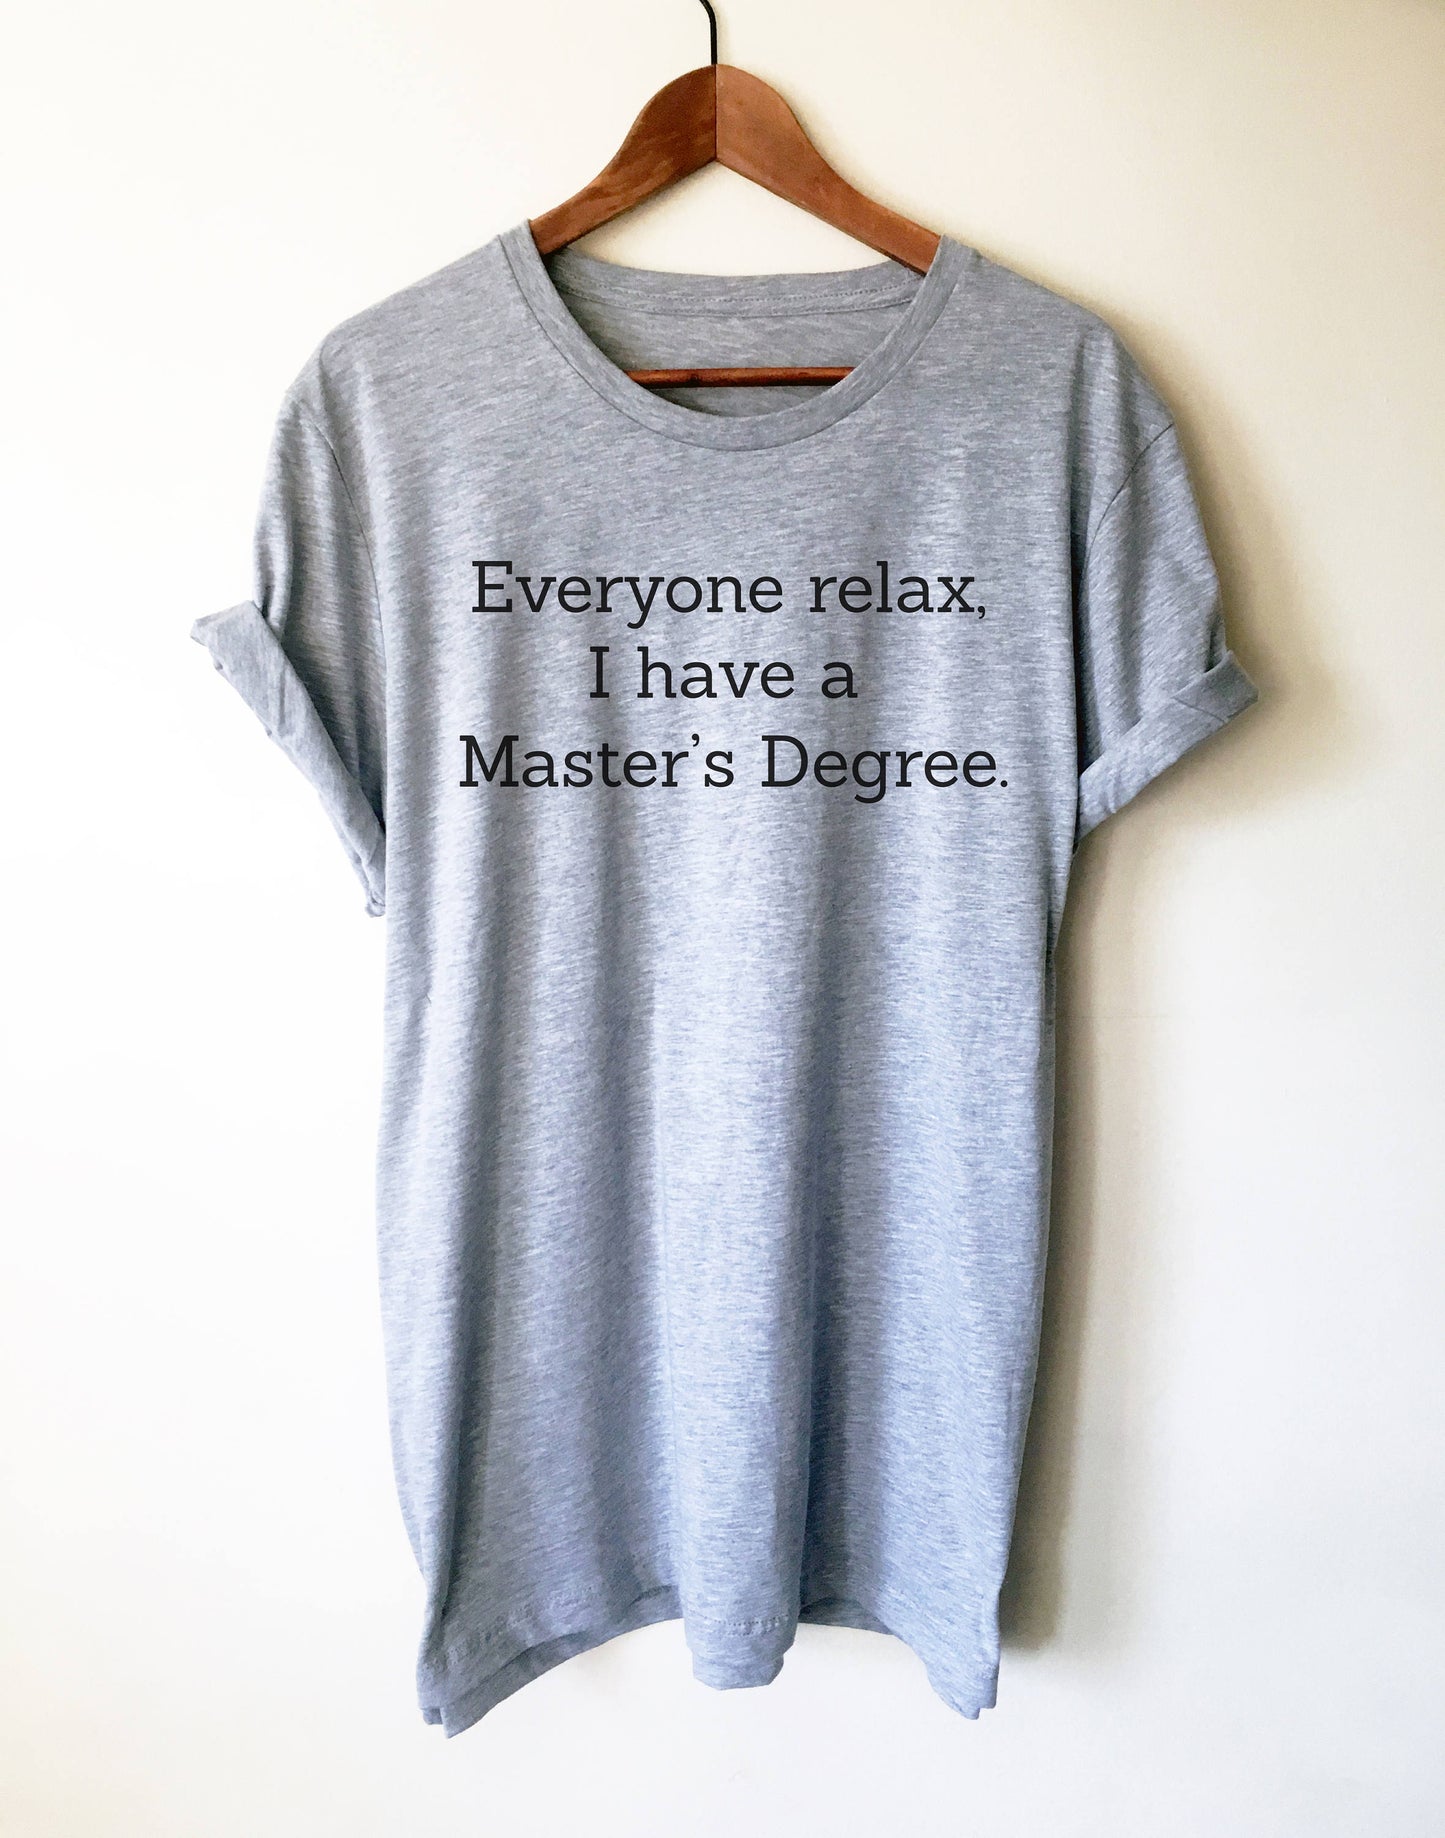 Everyone Relax I Have A Master's Degree Unisex Shirt - Graduation gift, College graduation, masters degree gift, masters degree gifts